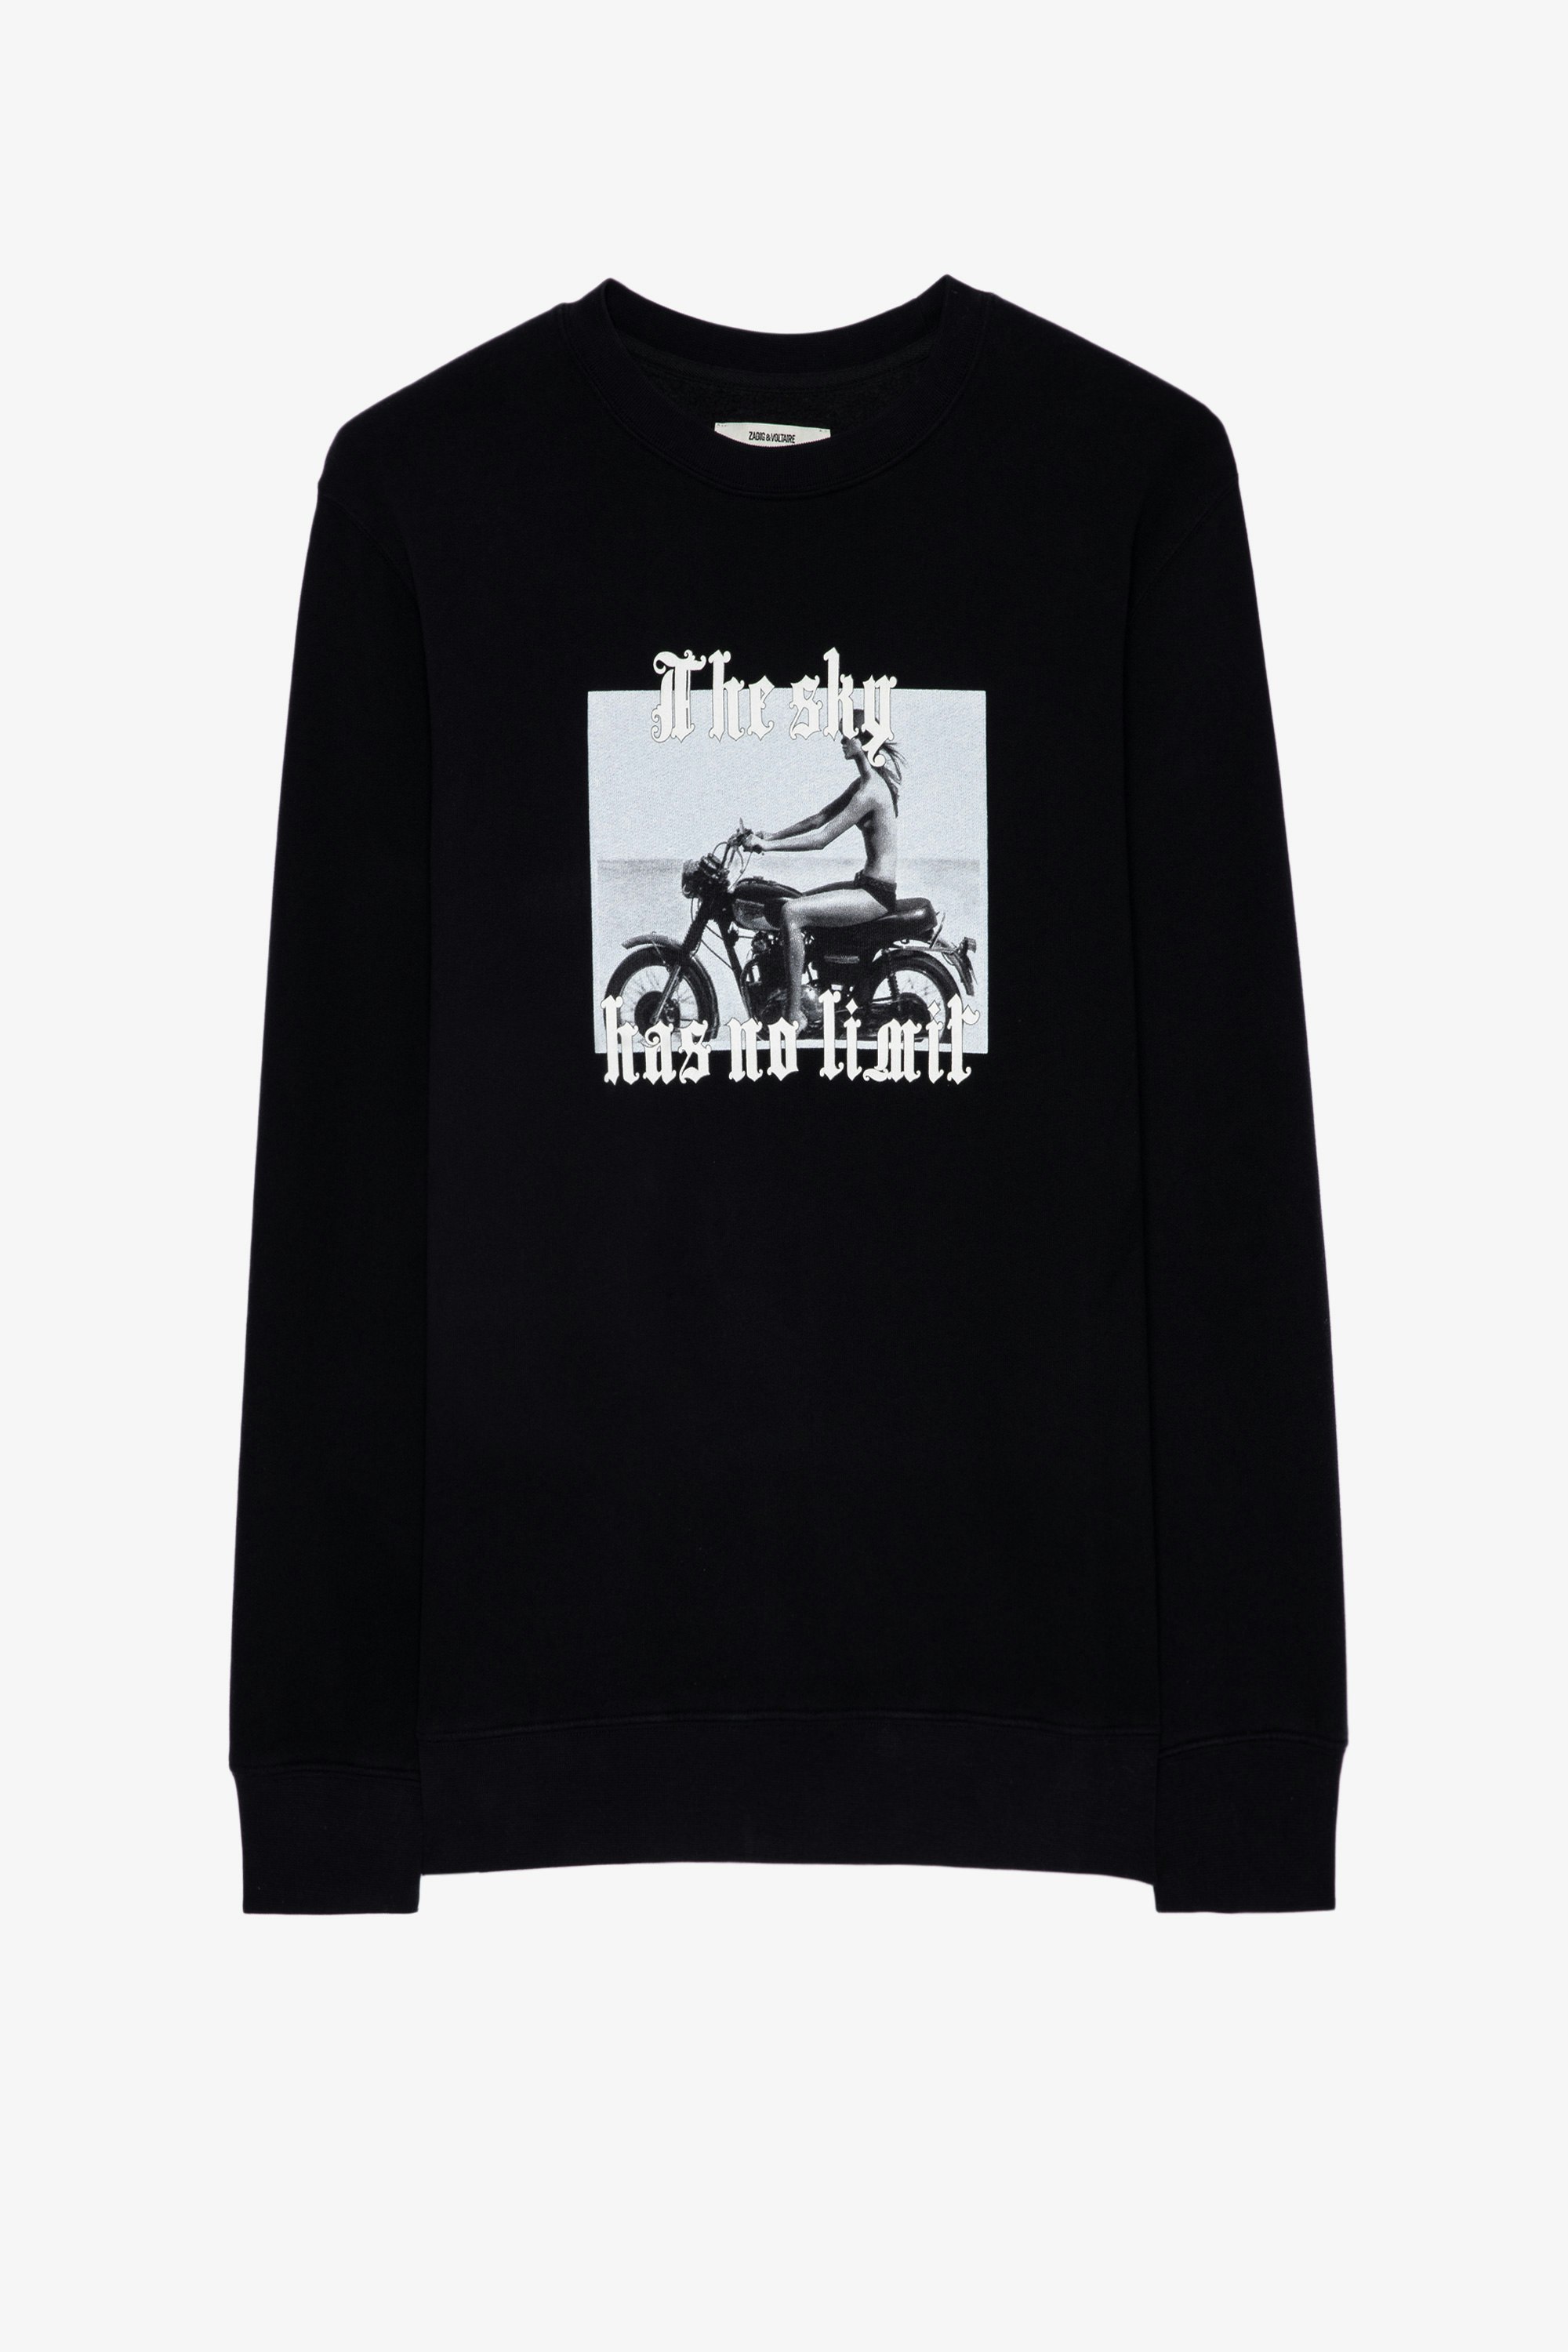 Simba Sweatshirt Men's 'the sky has no limit' jumper in black cotton with photo print